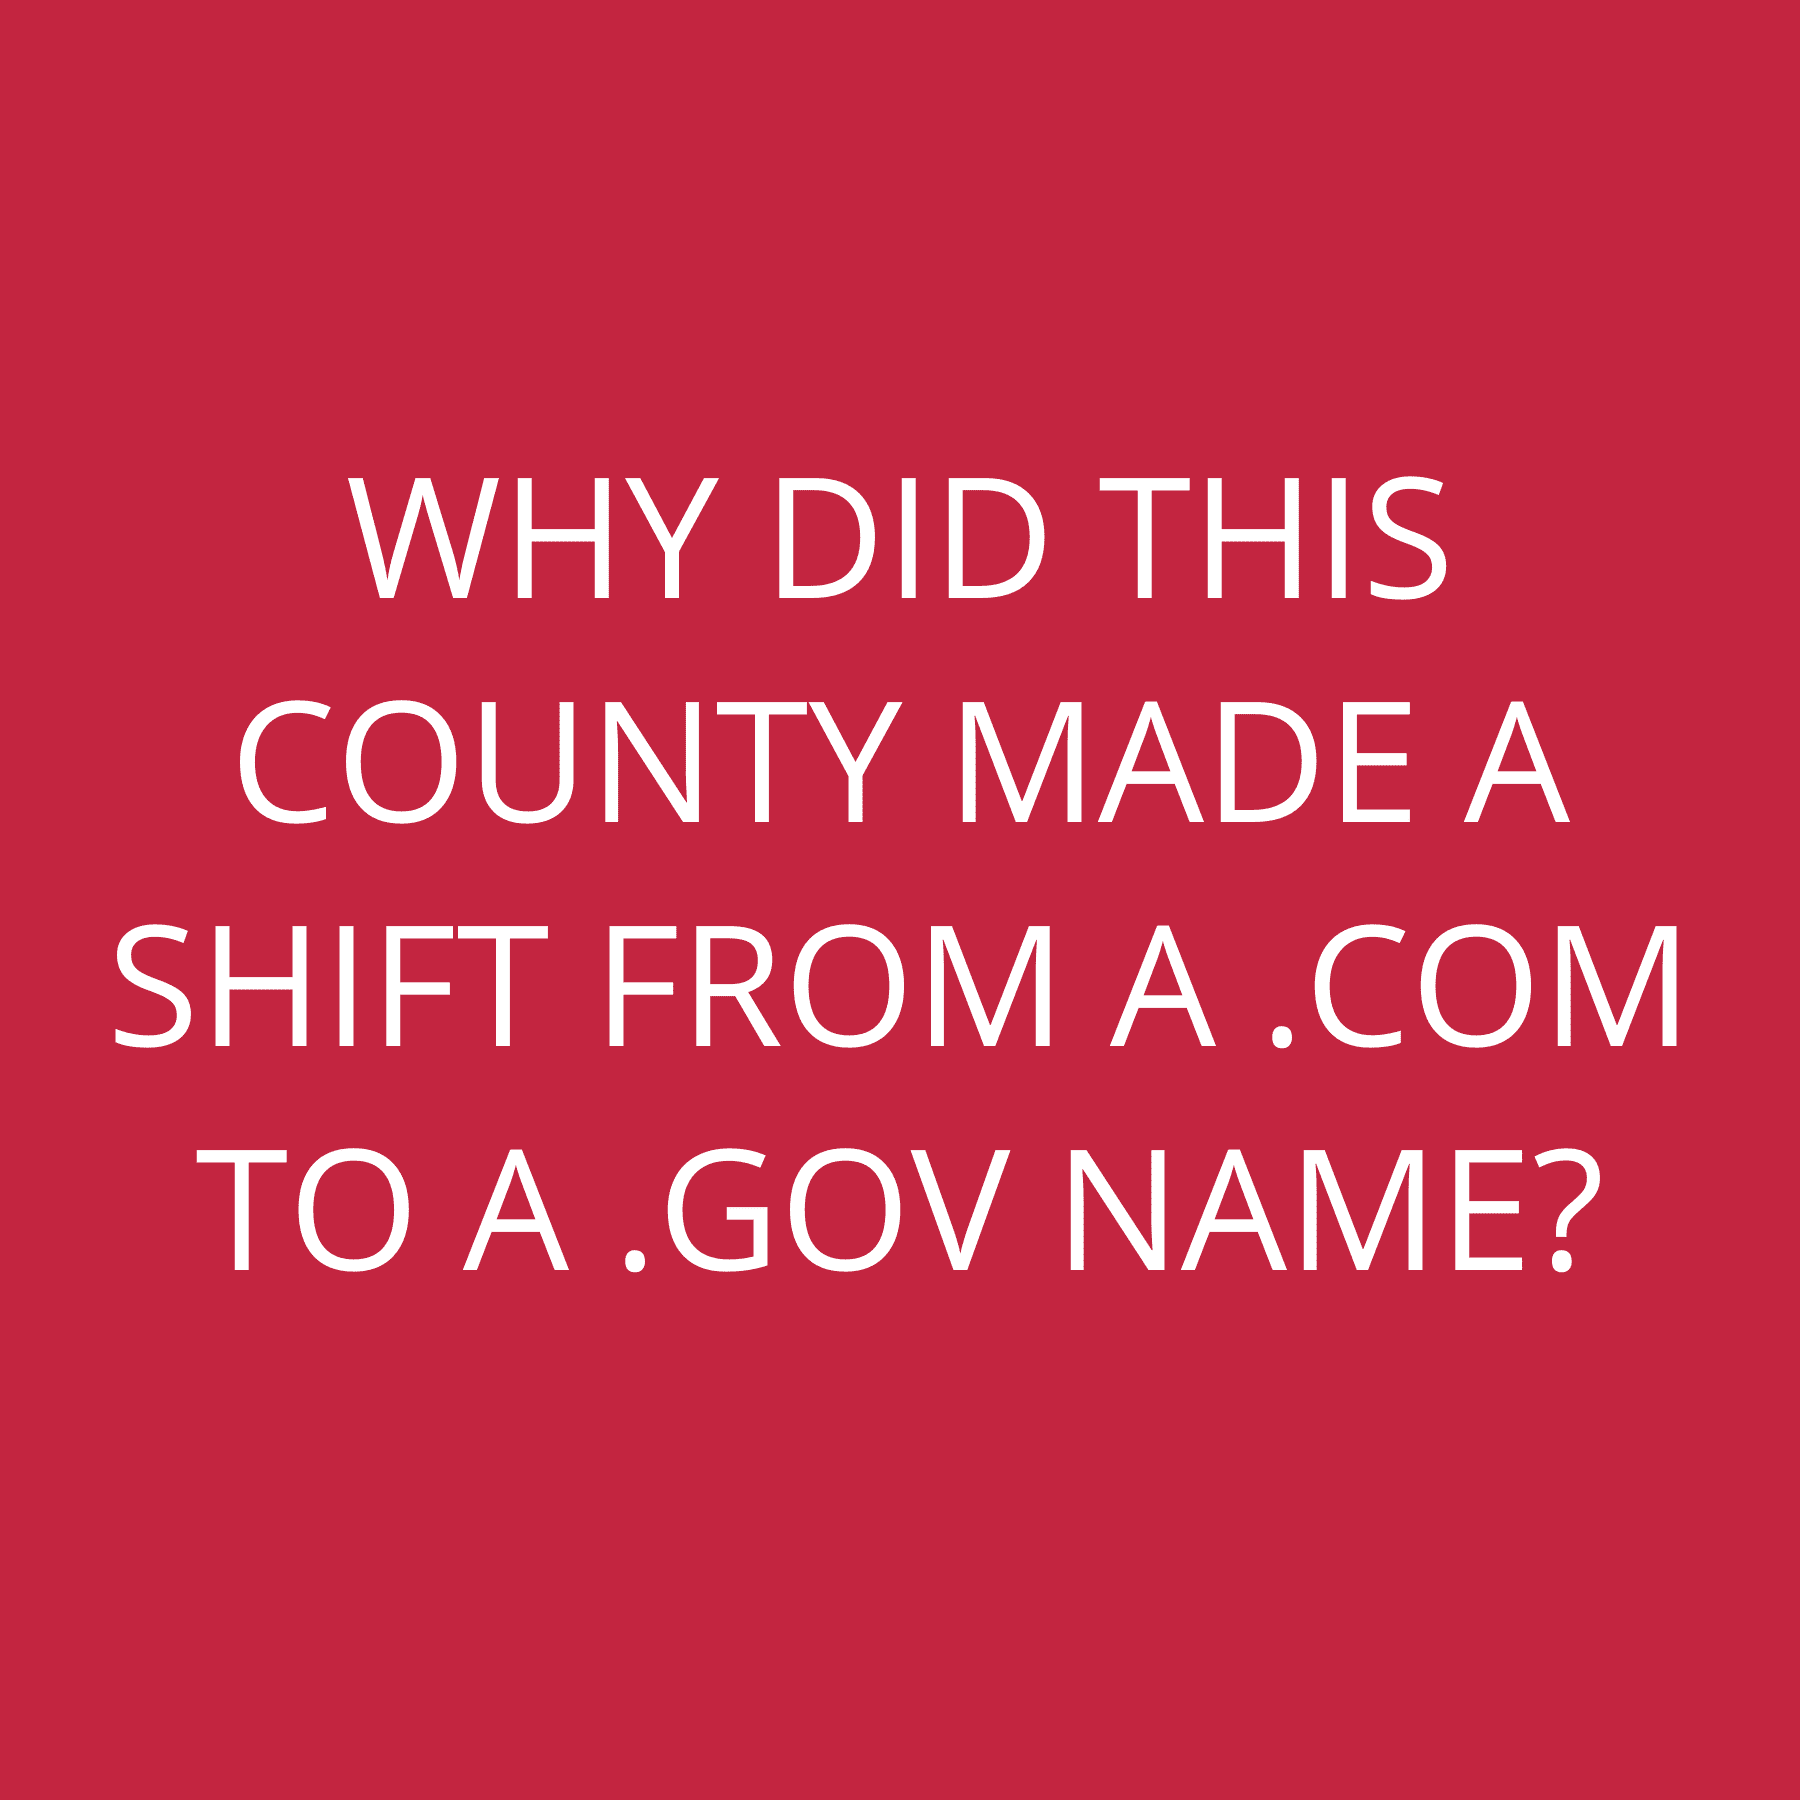 Why did this county made a shift from a .com to a .gov name?